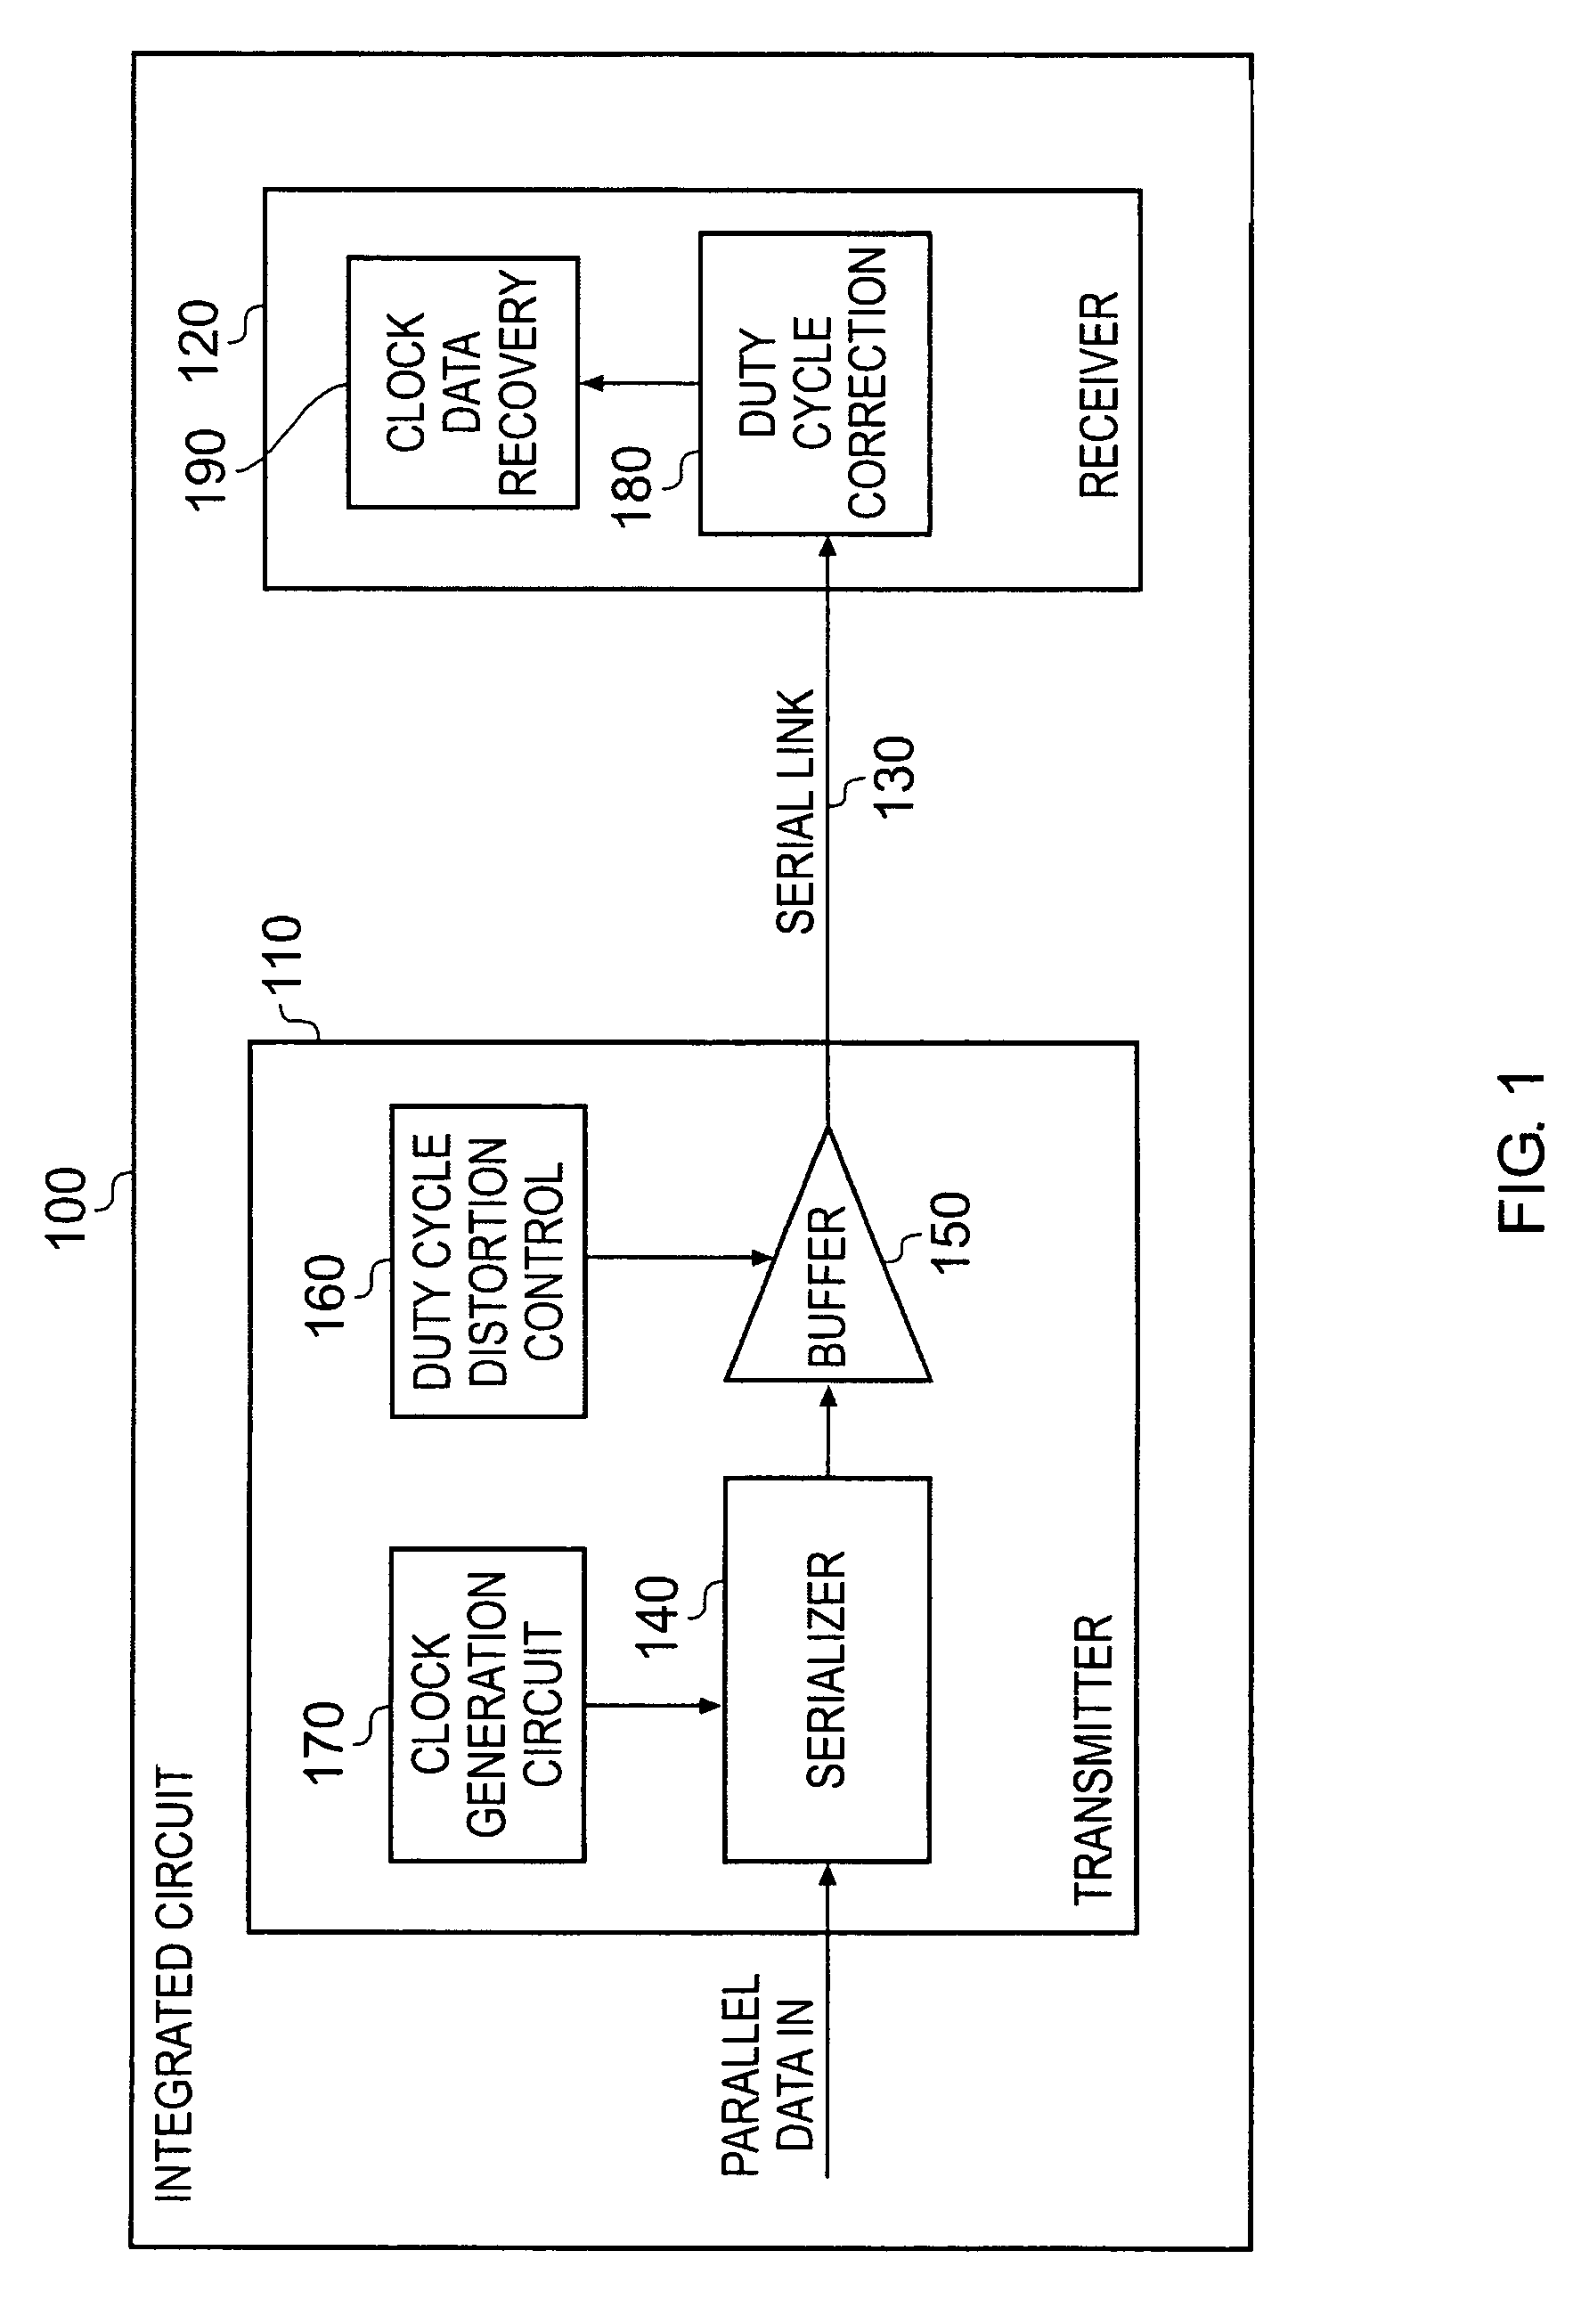 Programmable duty cycle distortion generation circuit